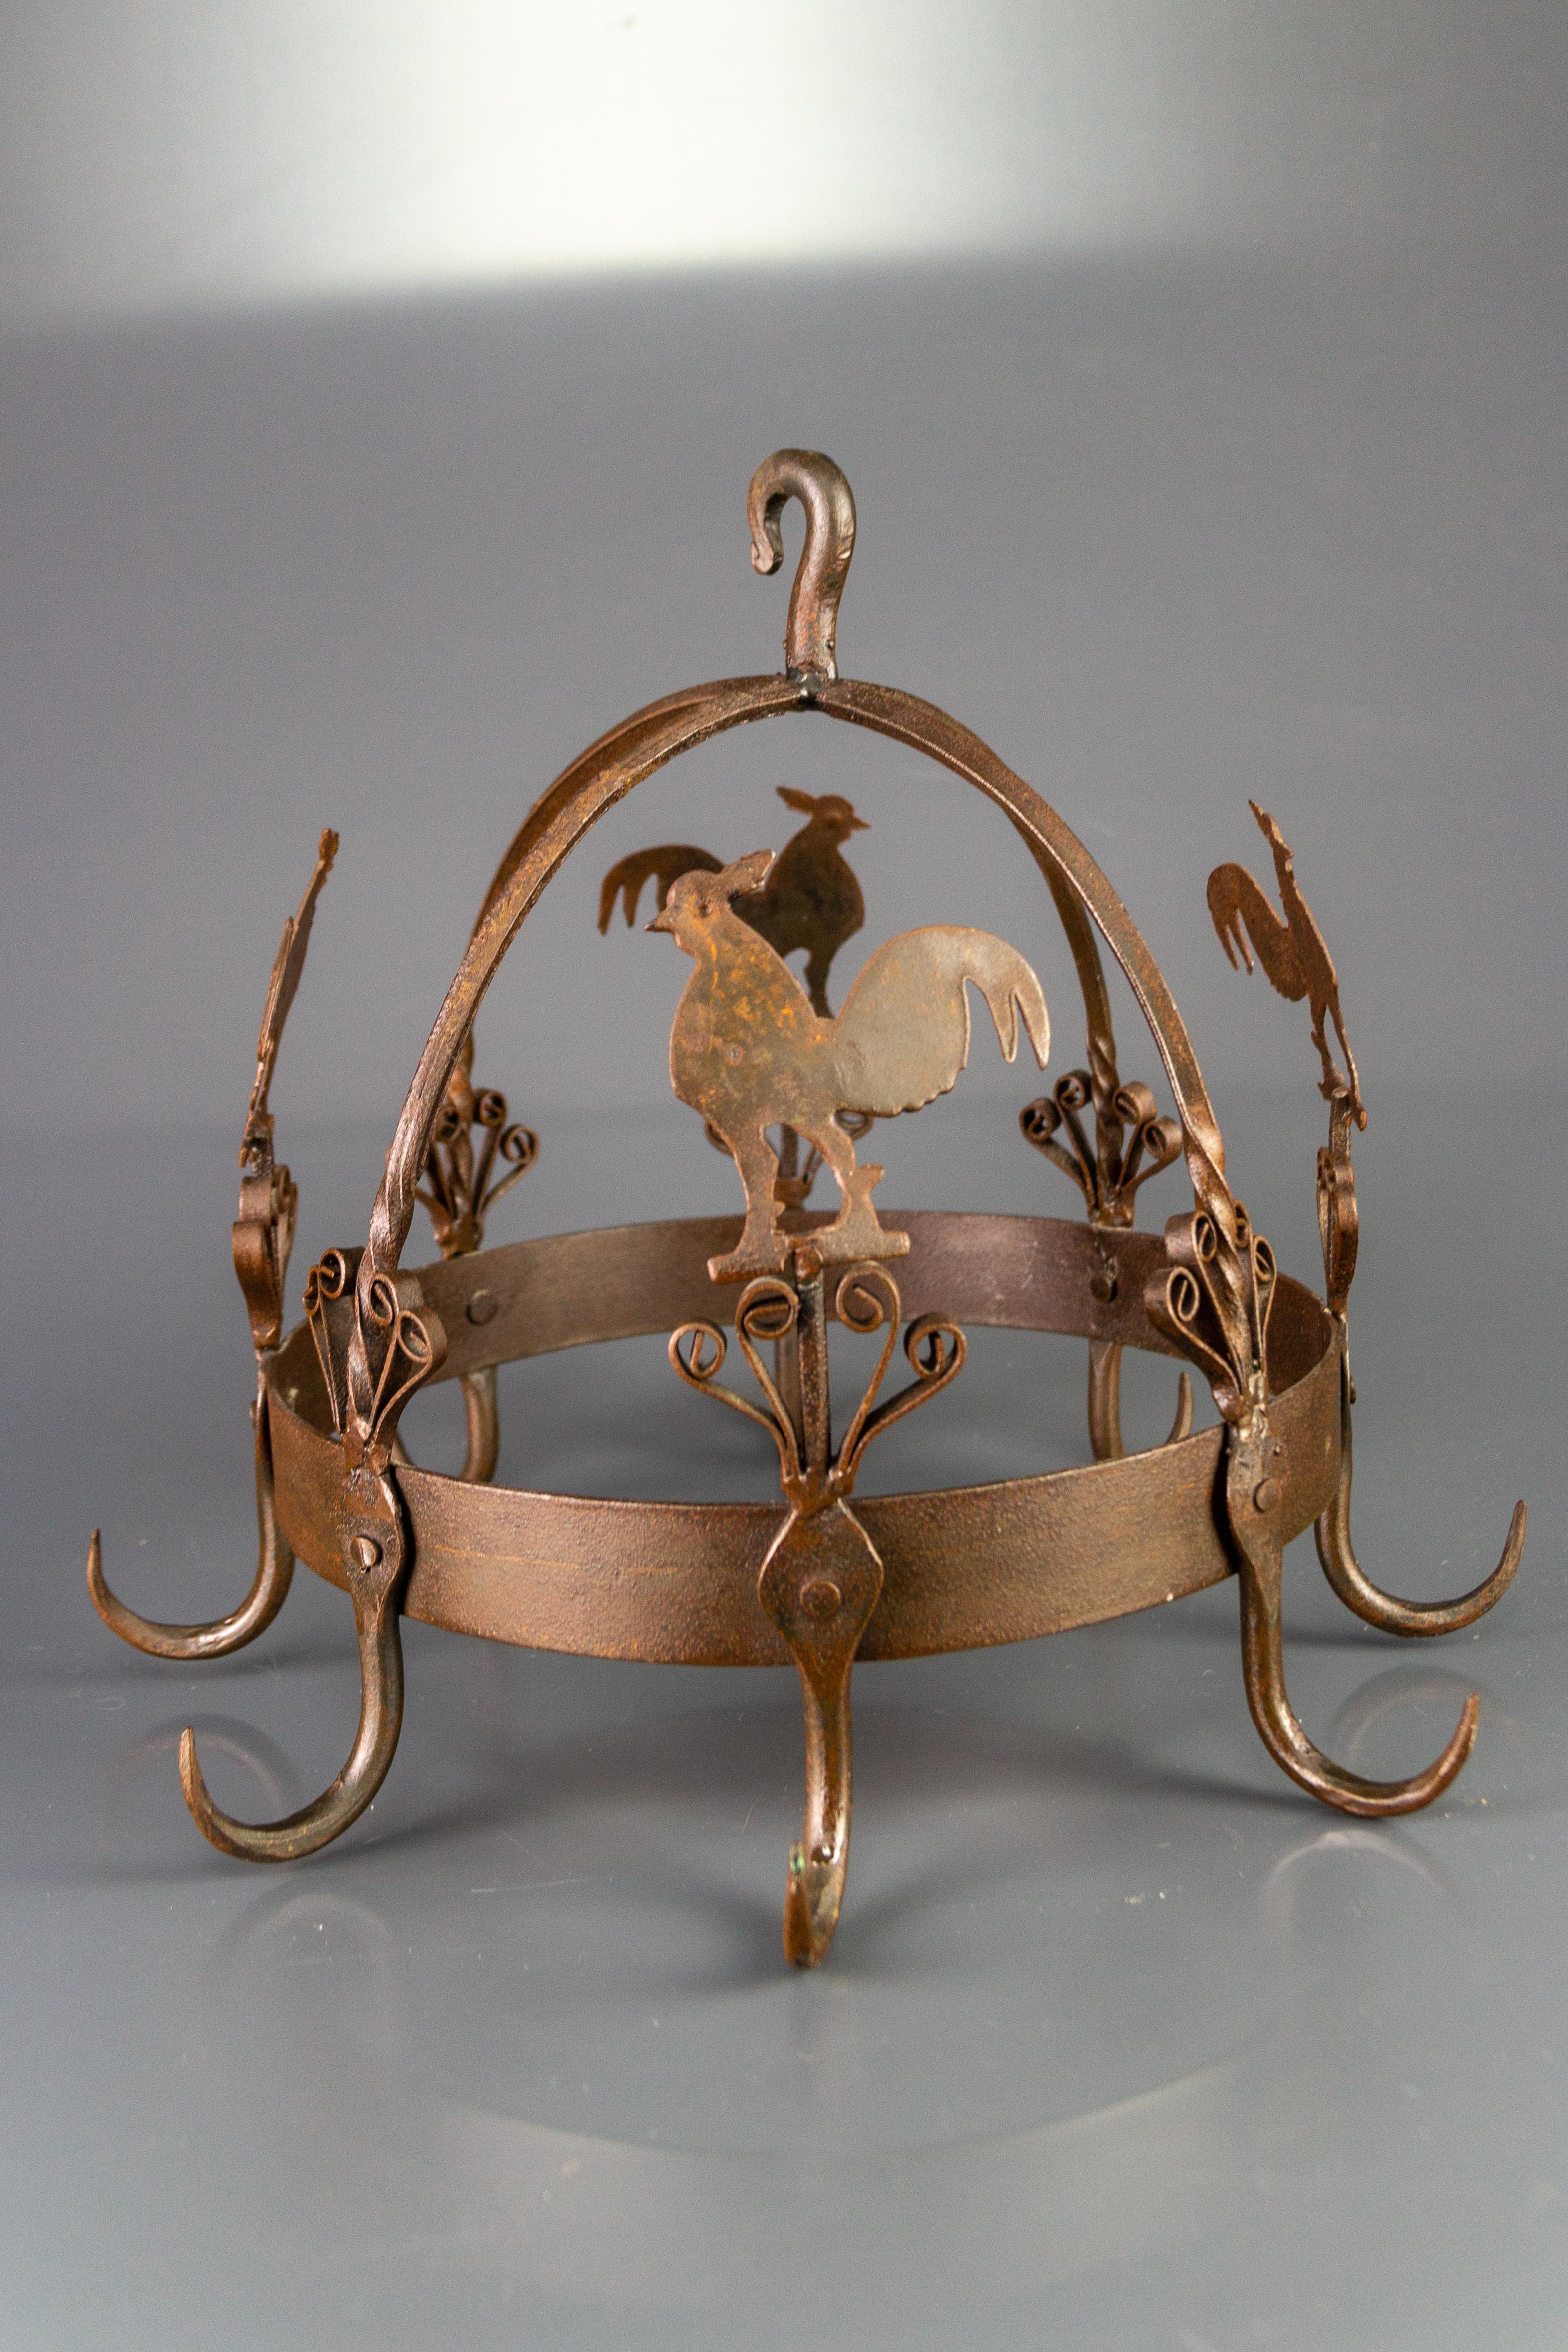 Adorable wrought iron and metal pot and pan or other kitchen utensils hanger, highlighted with rooster figures and scroll decors. This wonderful pot rack is the perfect combination of form and function, a decorative and practical accent in any